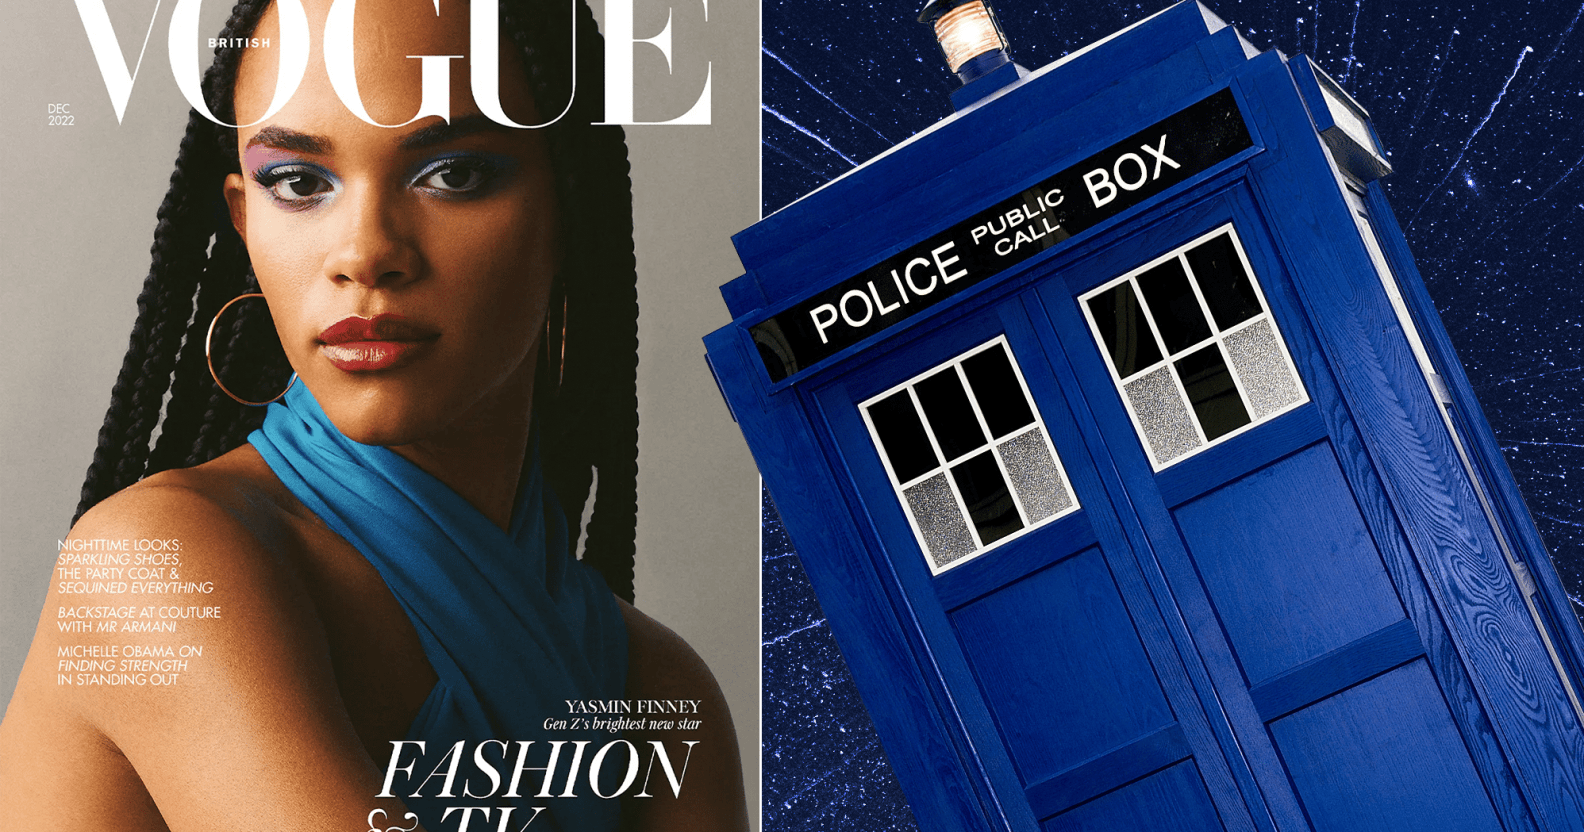 Yasmin Finney on the cover of Vogue Magazine next to an image of the Tardis from Doctor Who.